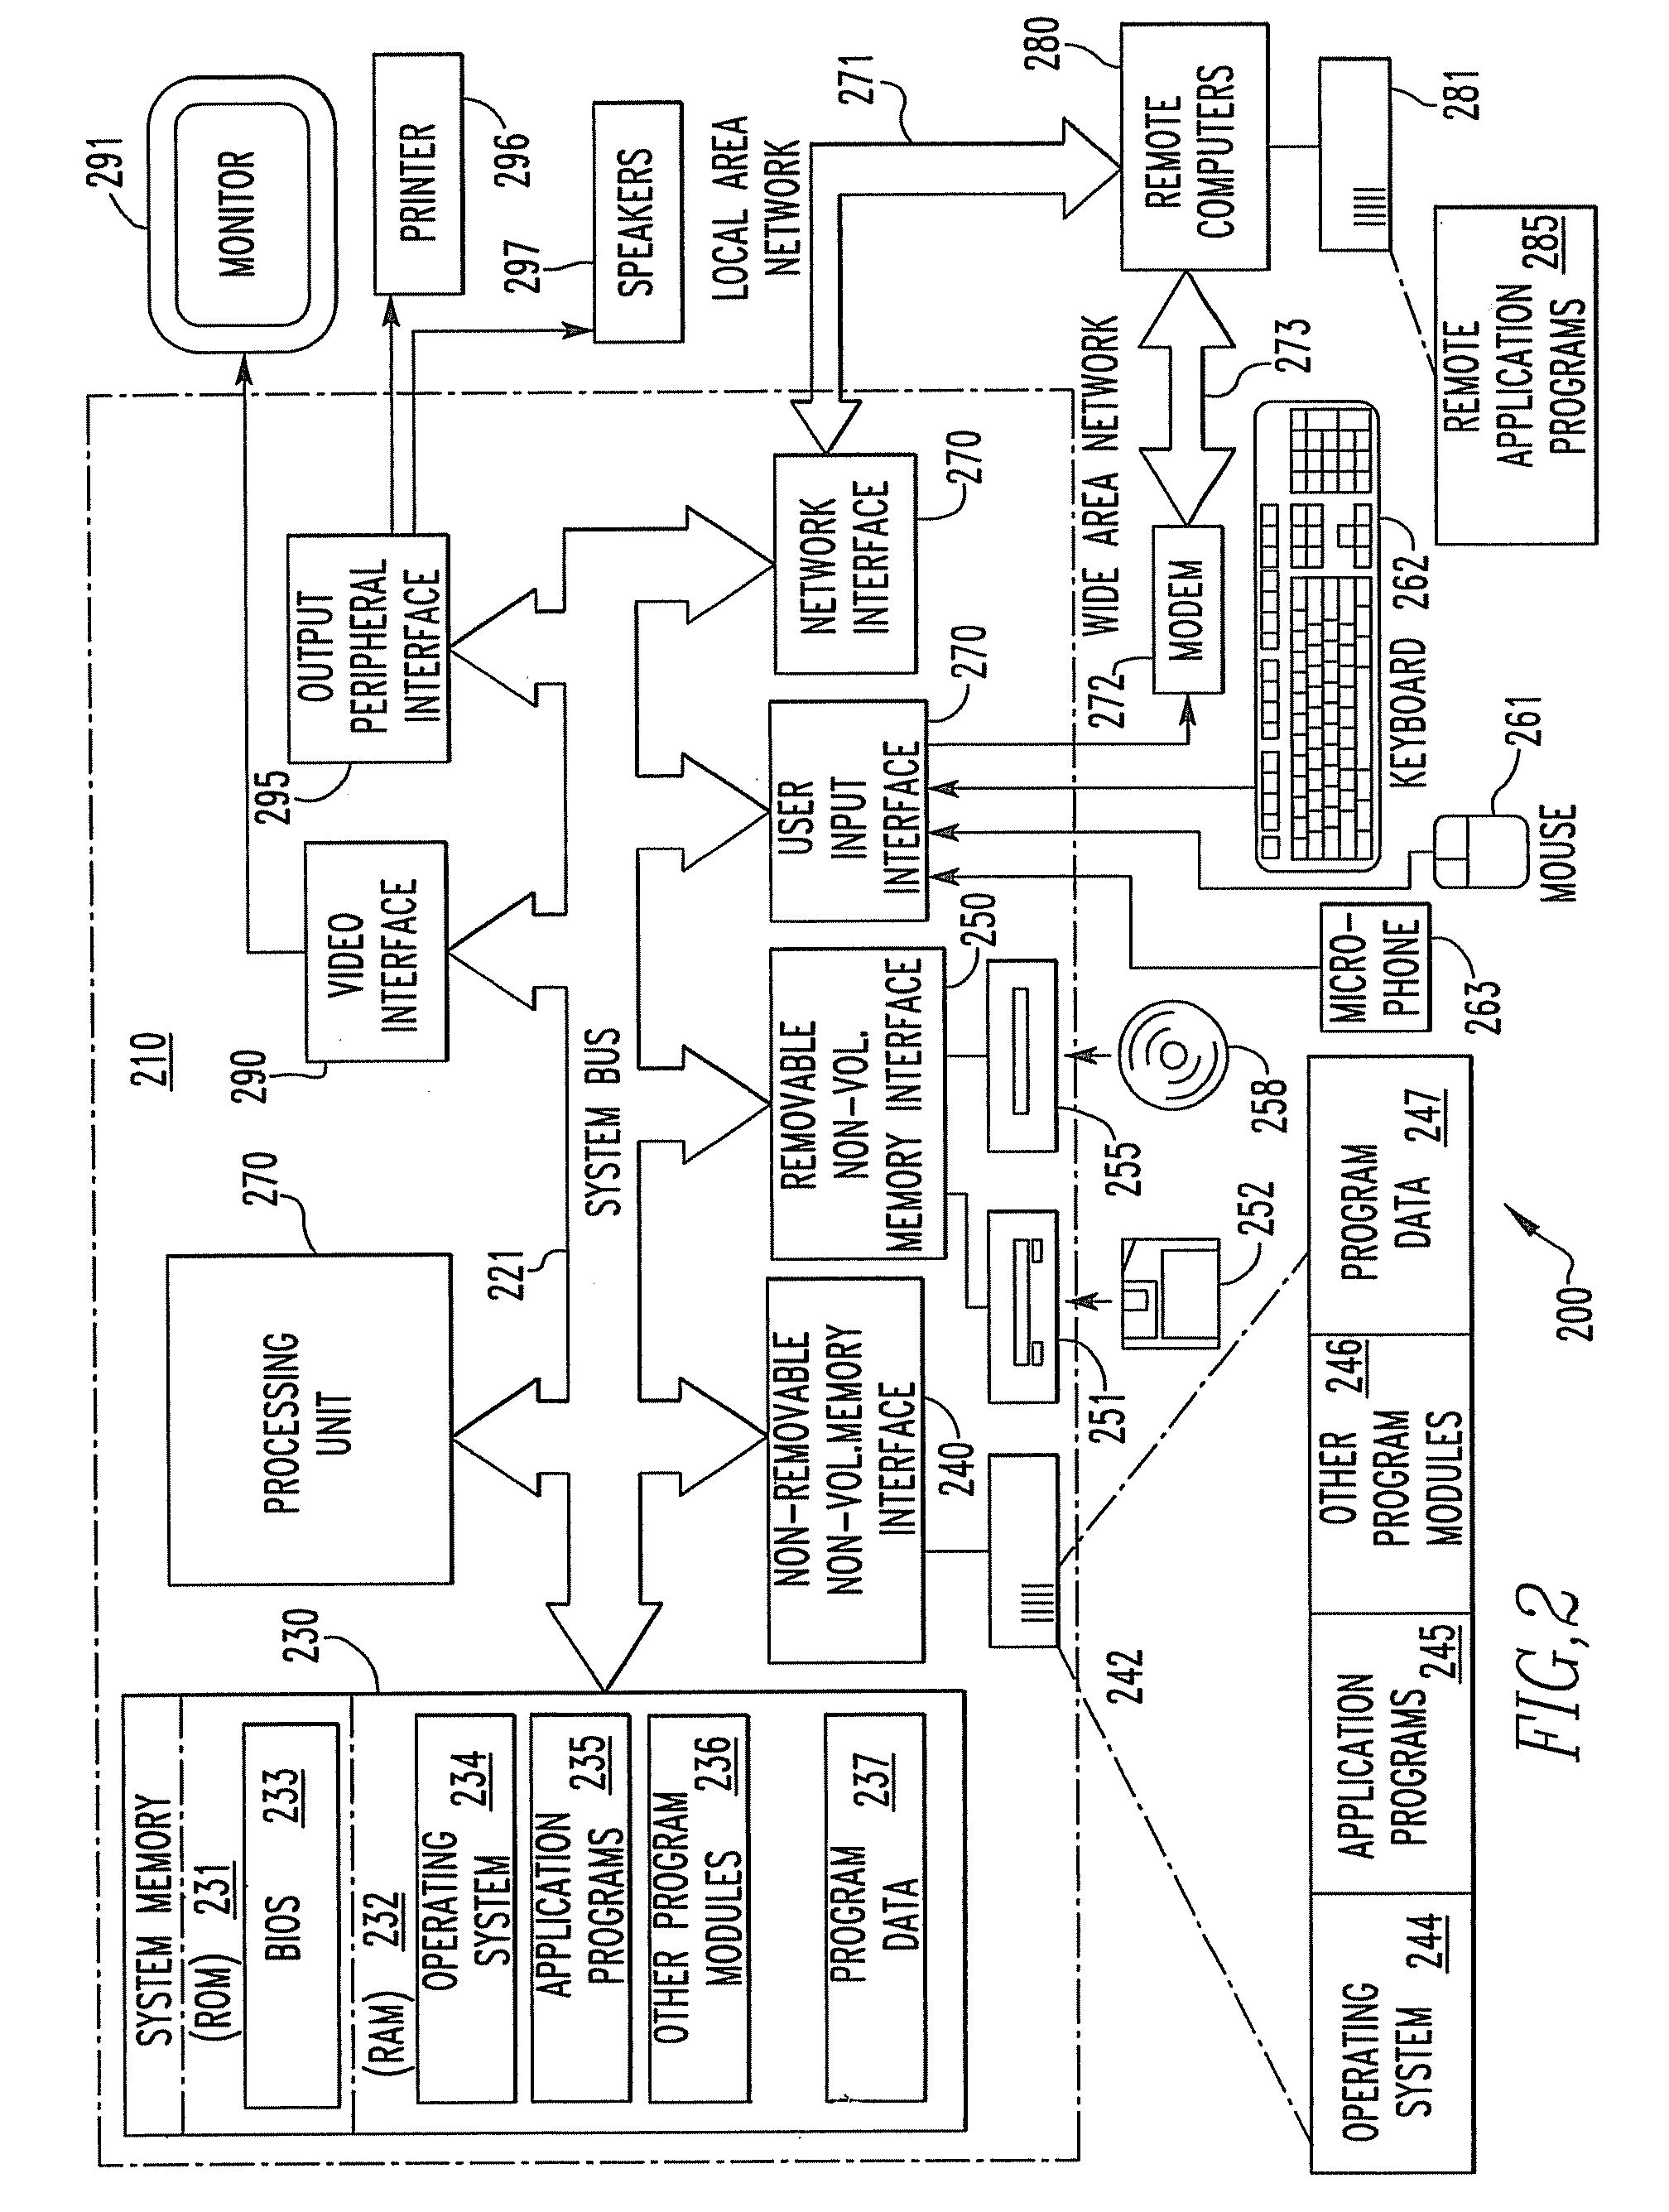 Educational Fitness and Health Training System and Method Having Research Capabilities